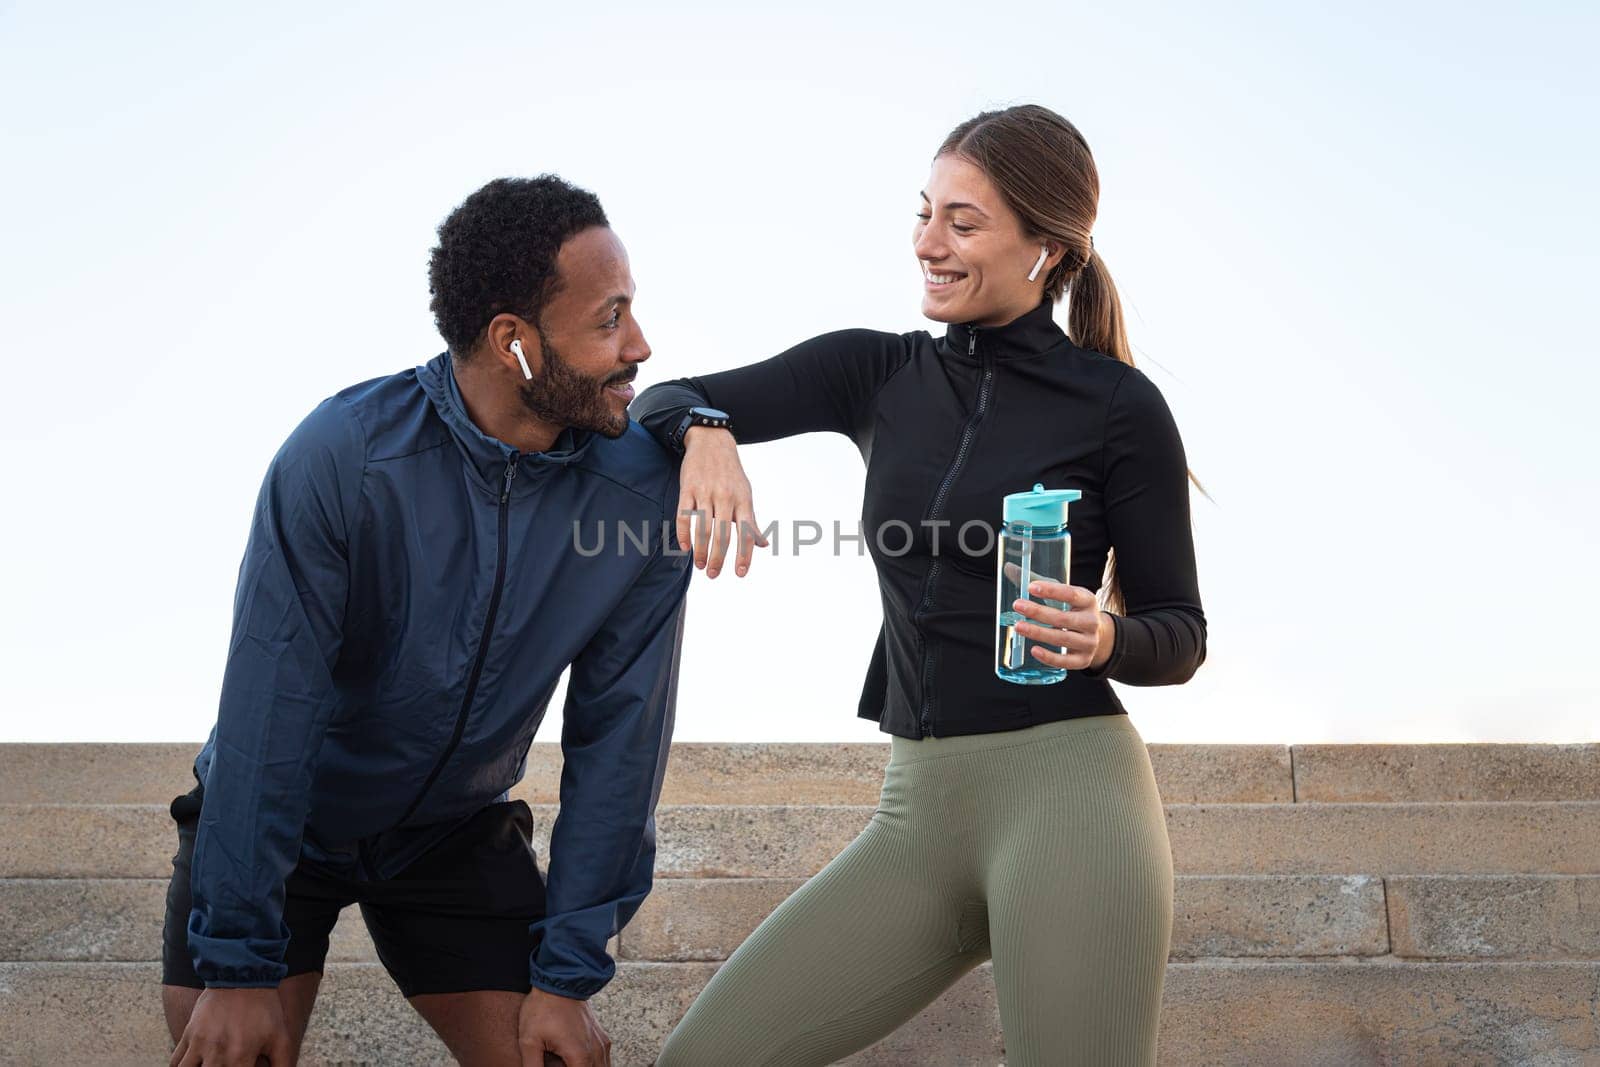 Young happy multiracial couple taking a break after running and working out together outdoors. Female holding water bottle. Fitness and sport concept.